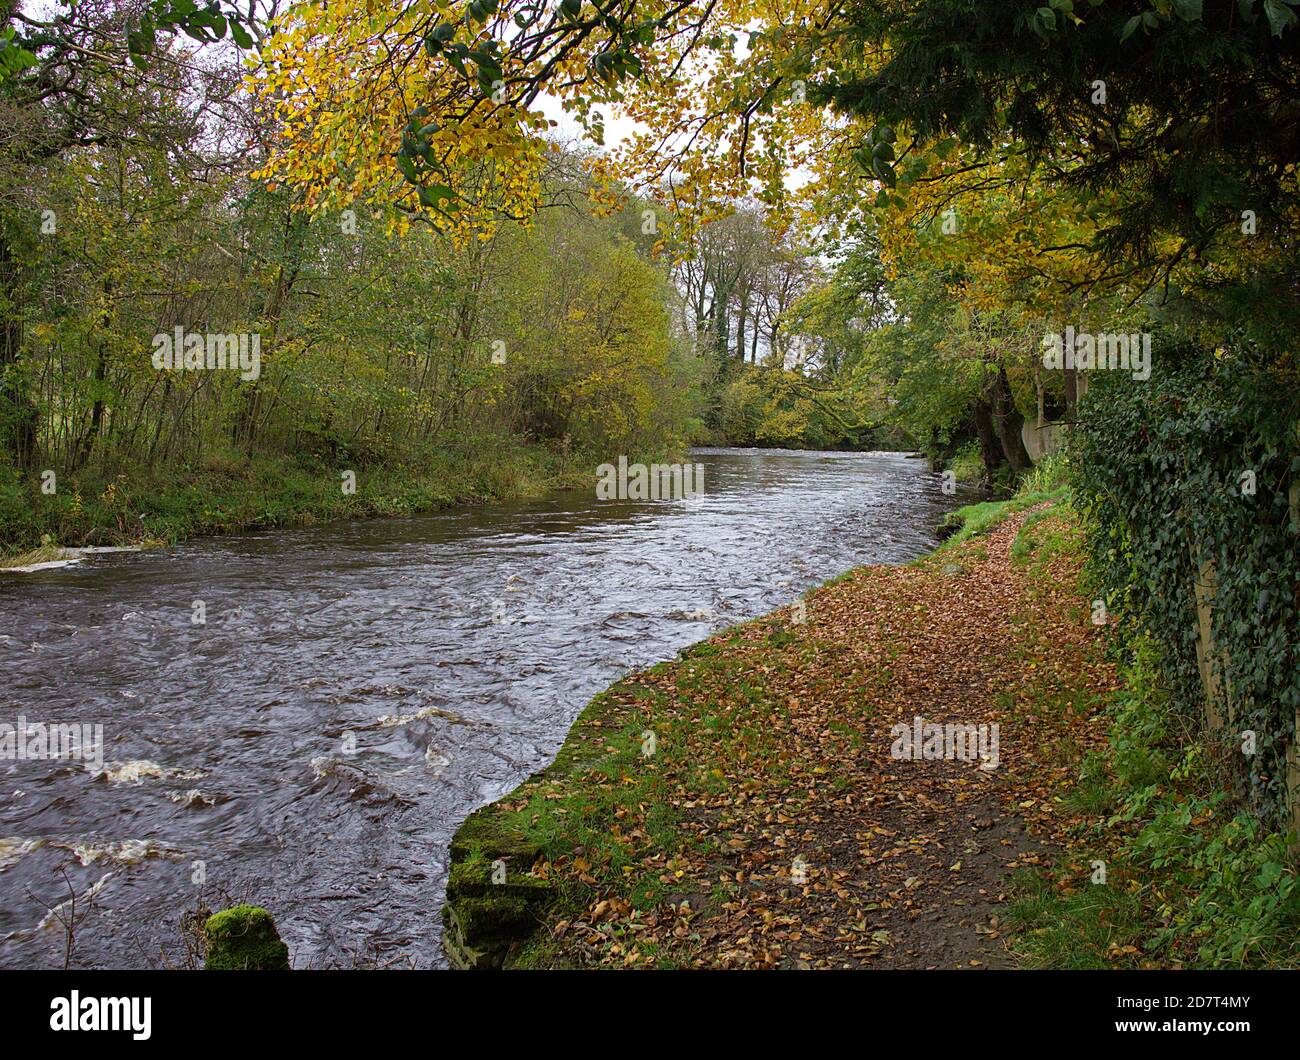 Autumn scene on the banks of the River Doon in Dalrymple Ayrshire, Scotland. Stock Photo